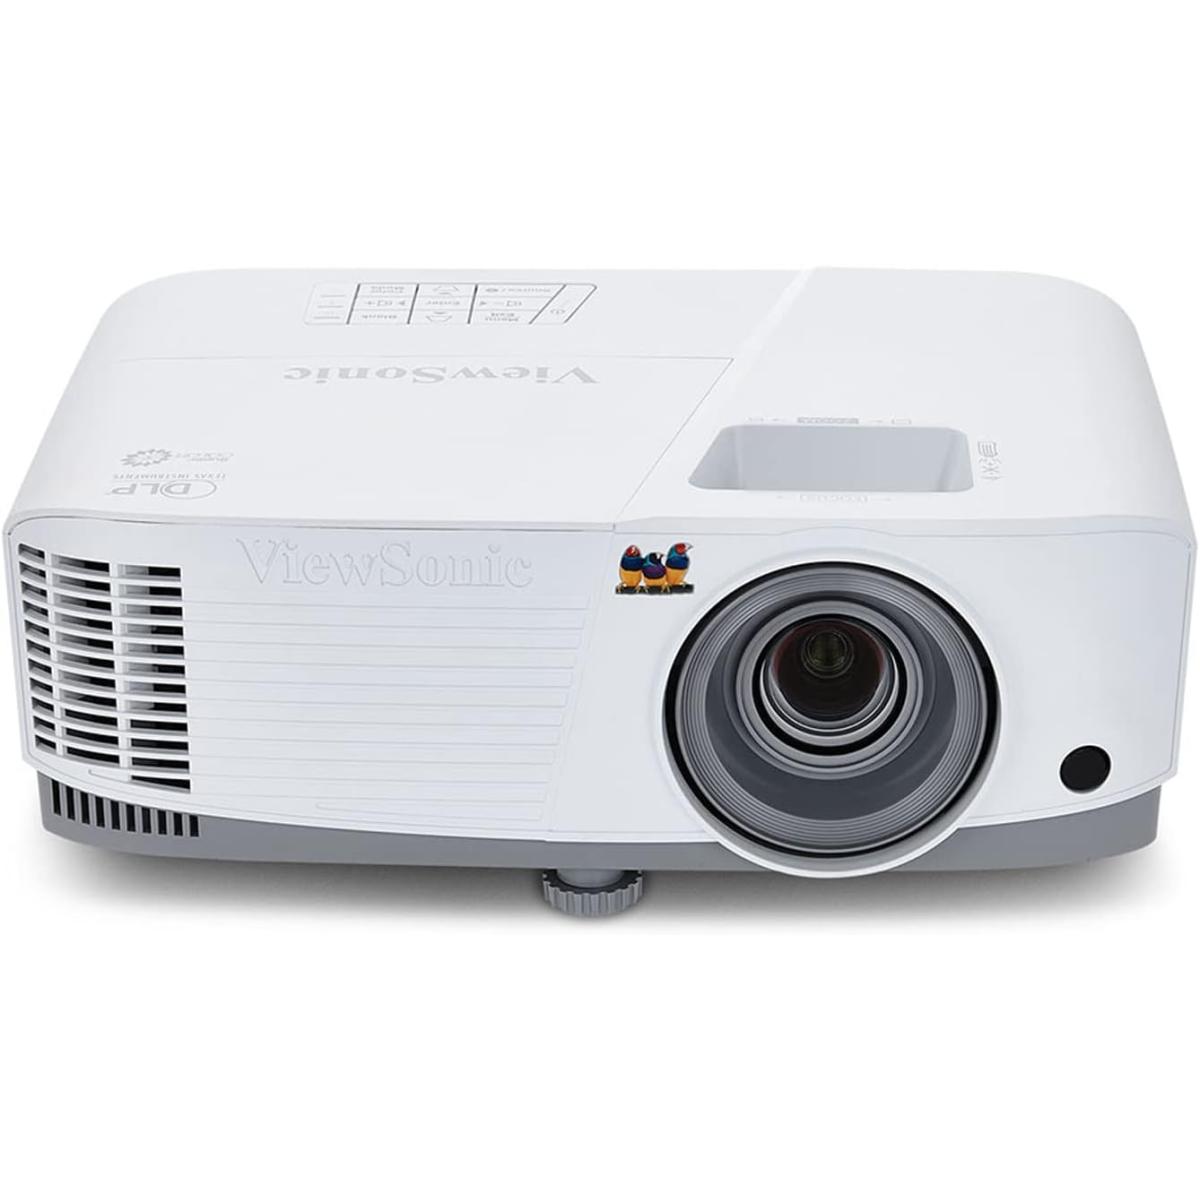 ViewSonic (PA503SE) Business Projector 4,000 ANSI Lumens Native SVGA Resolution, Higher Brightness, SuperColor Technology, 1.07B Colors, Up To 1080p Resolution Support, Up To 300